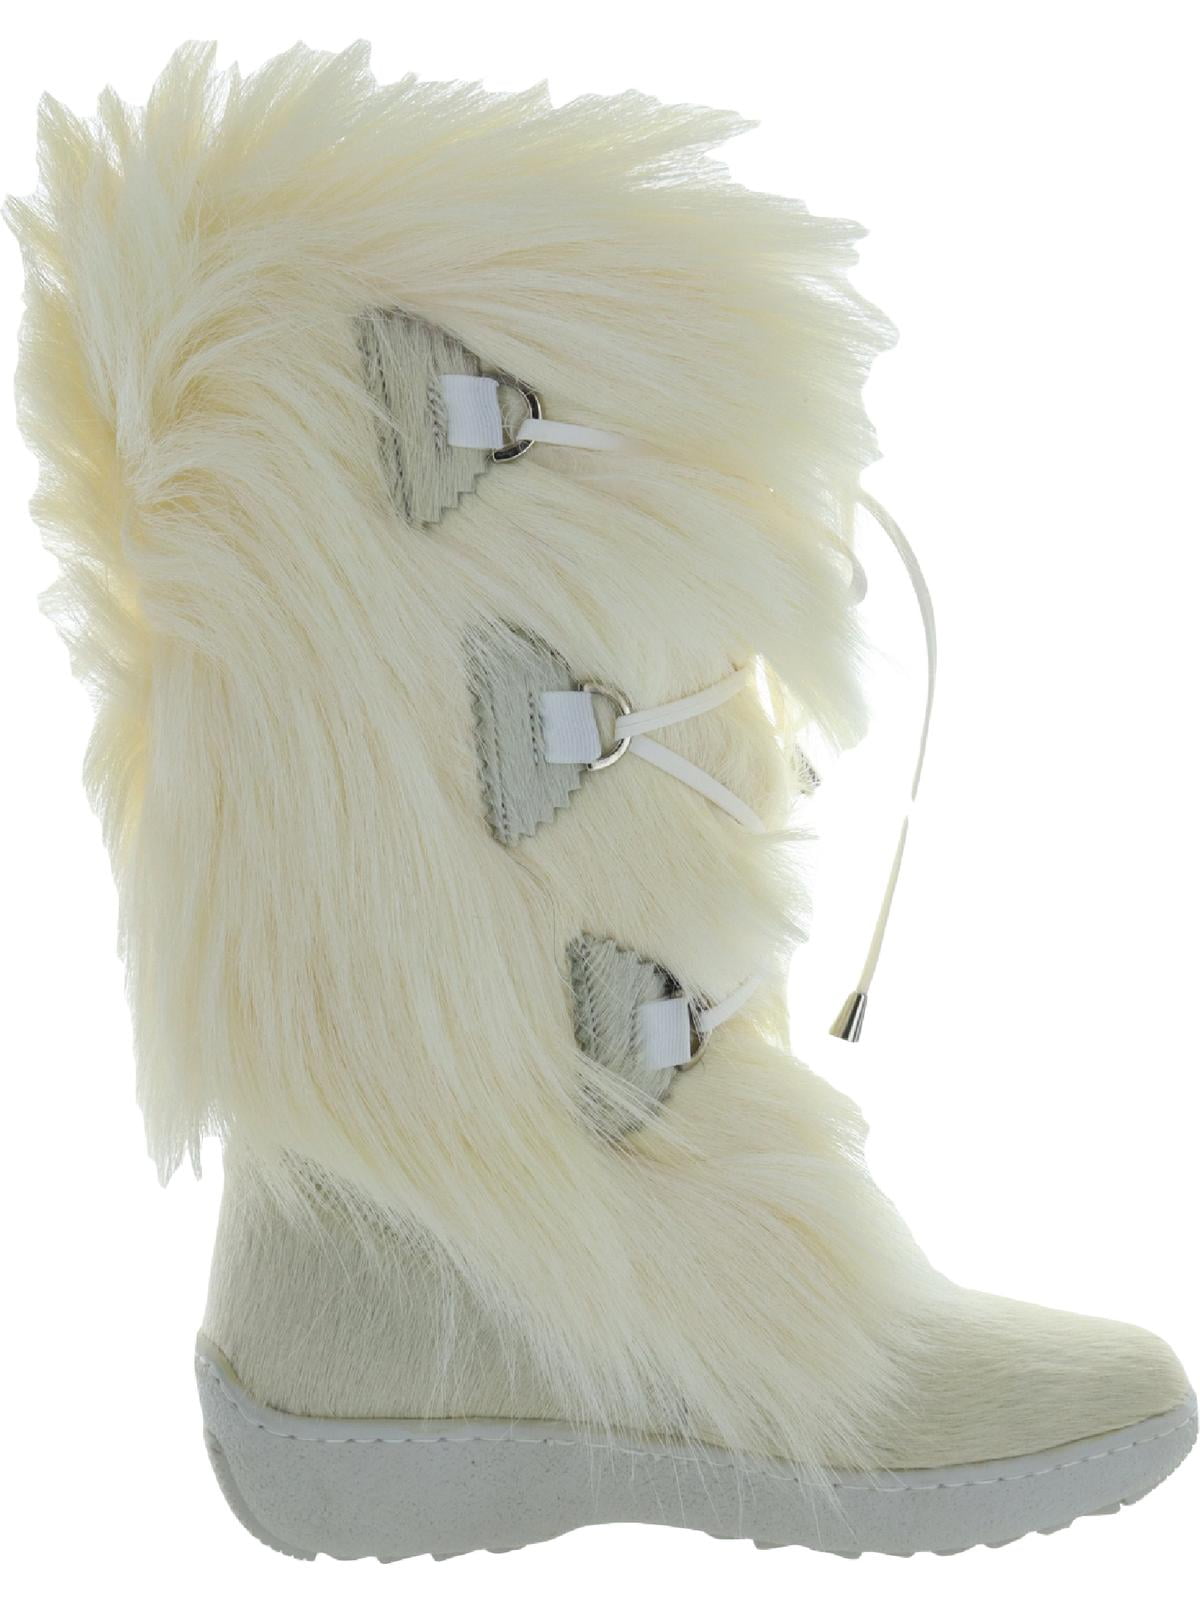 Luxe Fur Boots with Cowhide, Rabbit, & Lamb Lined Boots by Pajar Canada  PAJ0103